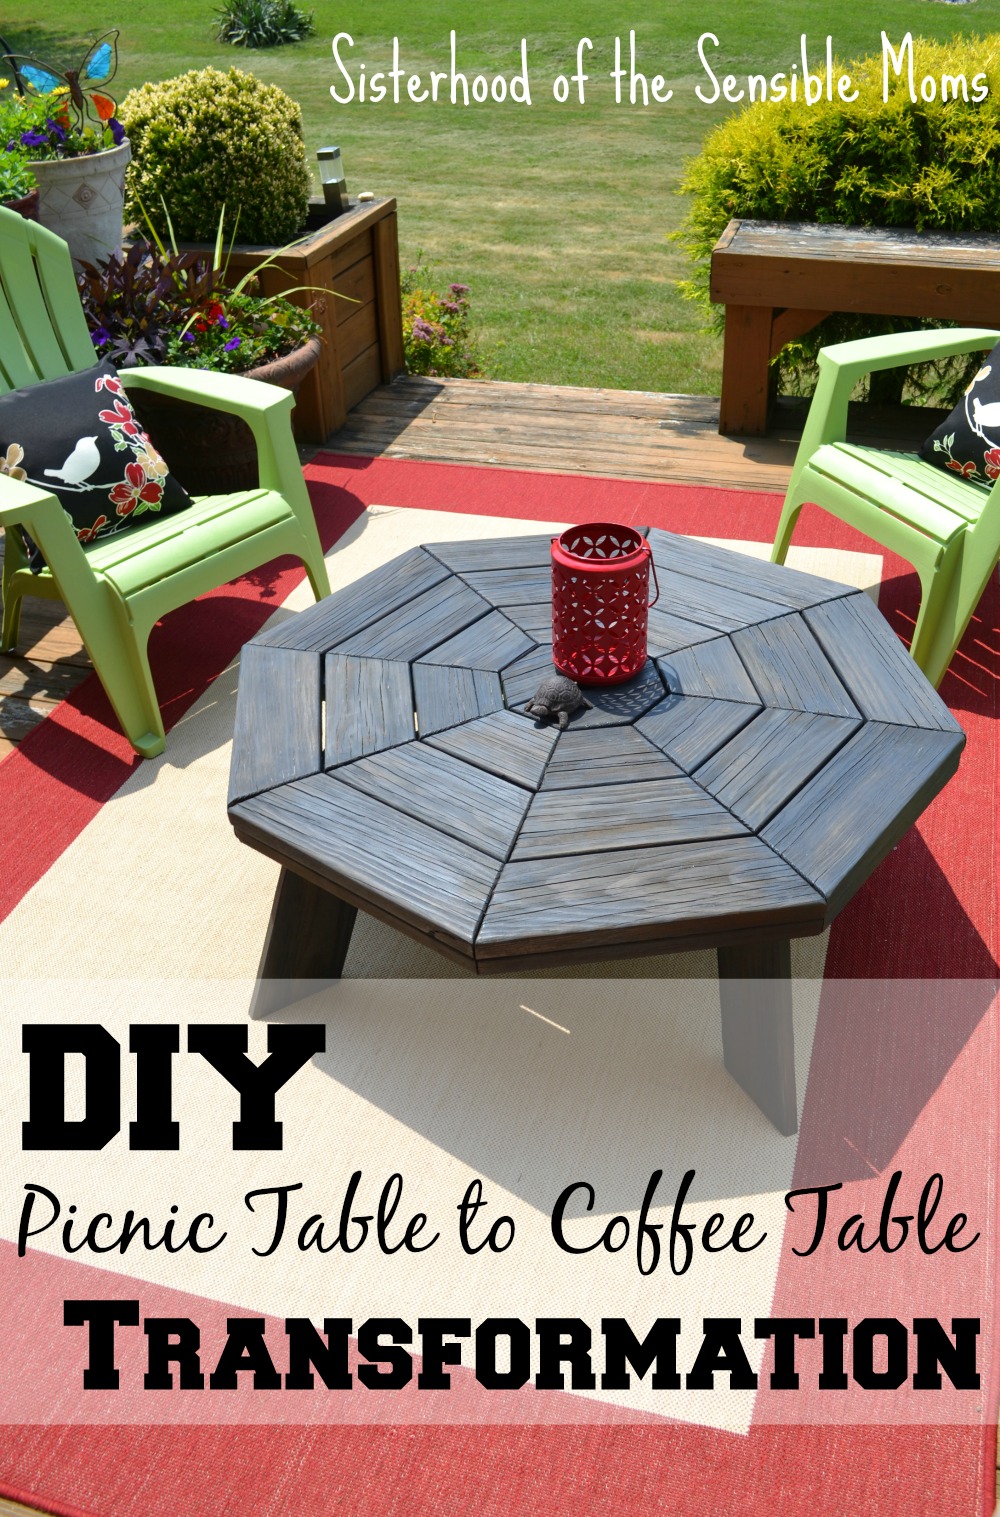 DIY Picnic Table to Coffee Table Transformation -- A tale of reusing, recycling, and rebirth with a touch of design. Sisterhood of the Sensible Moms